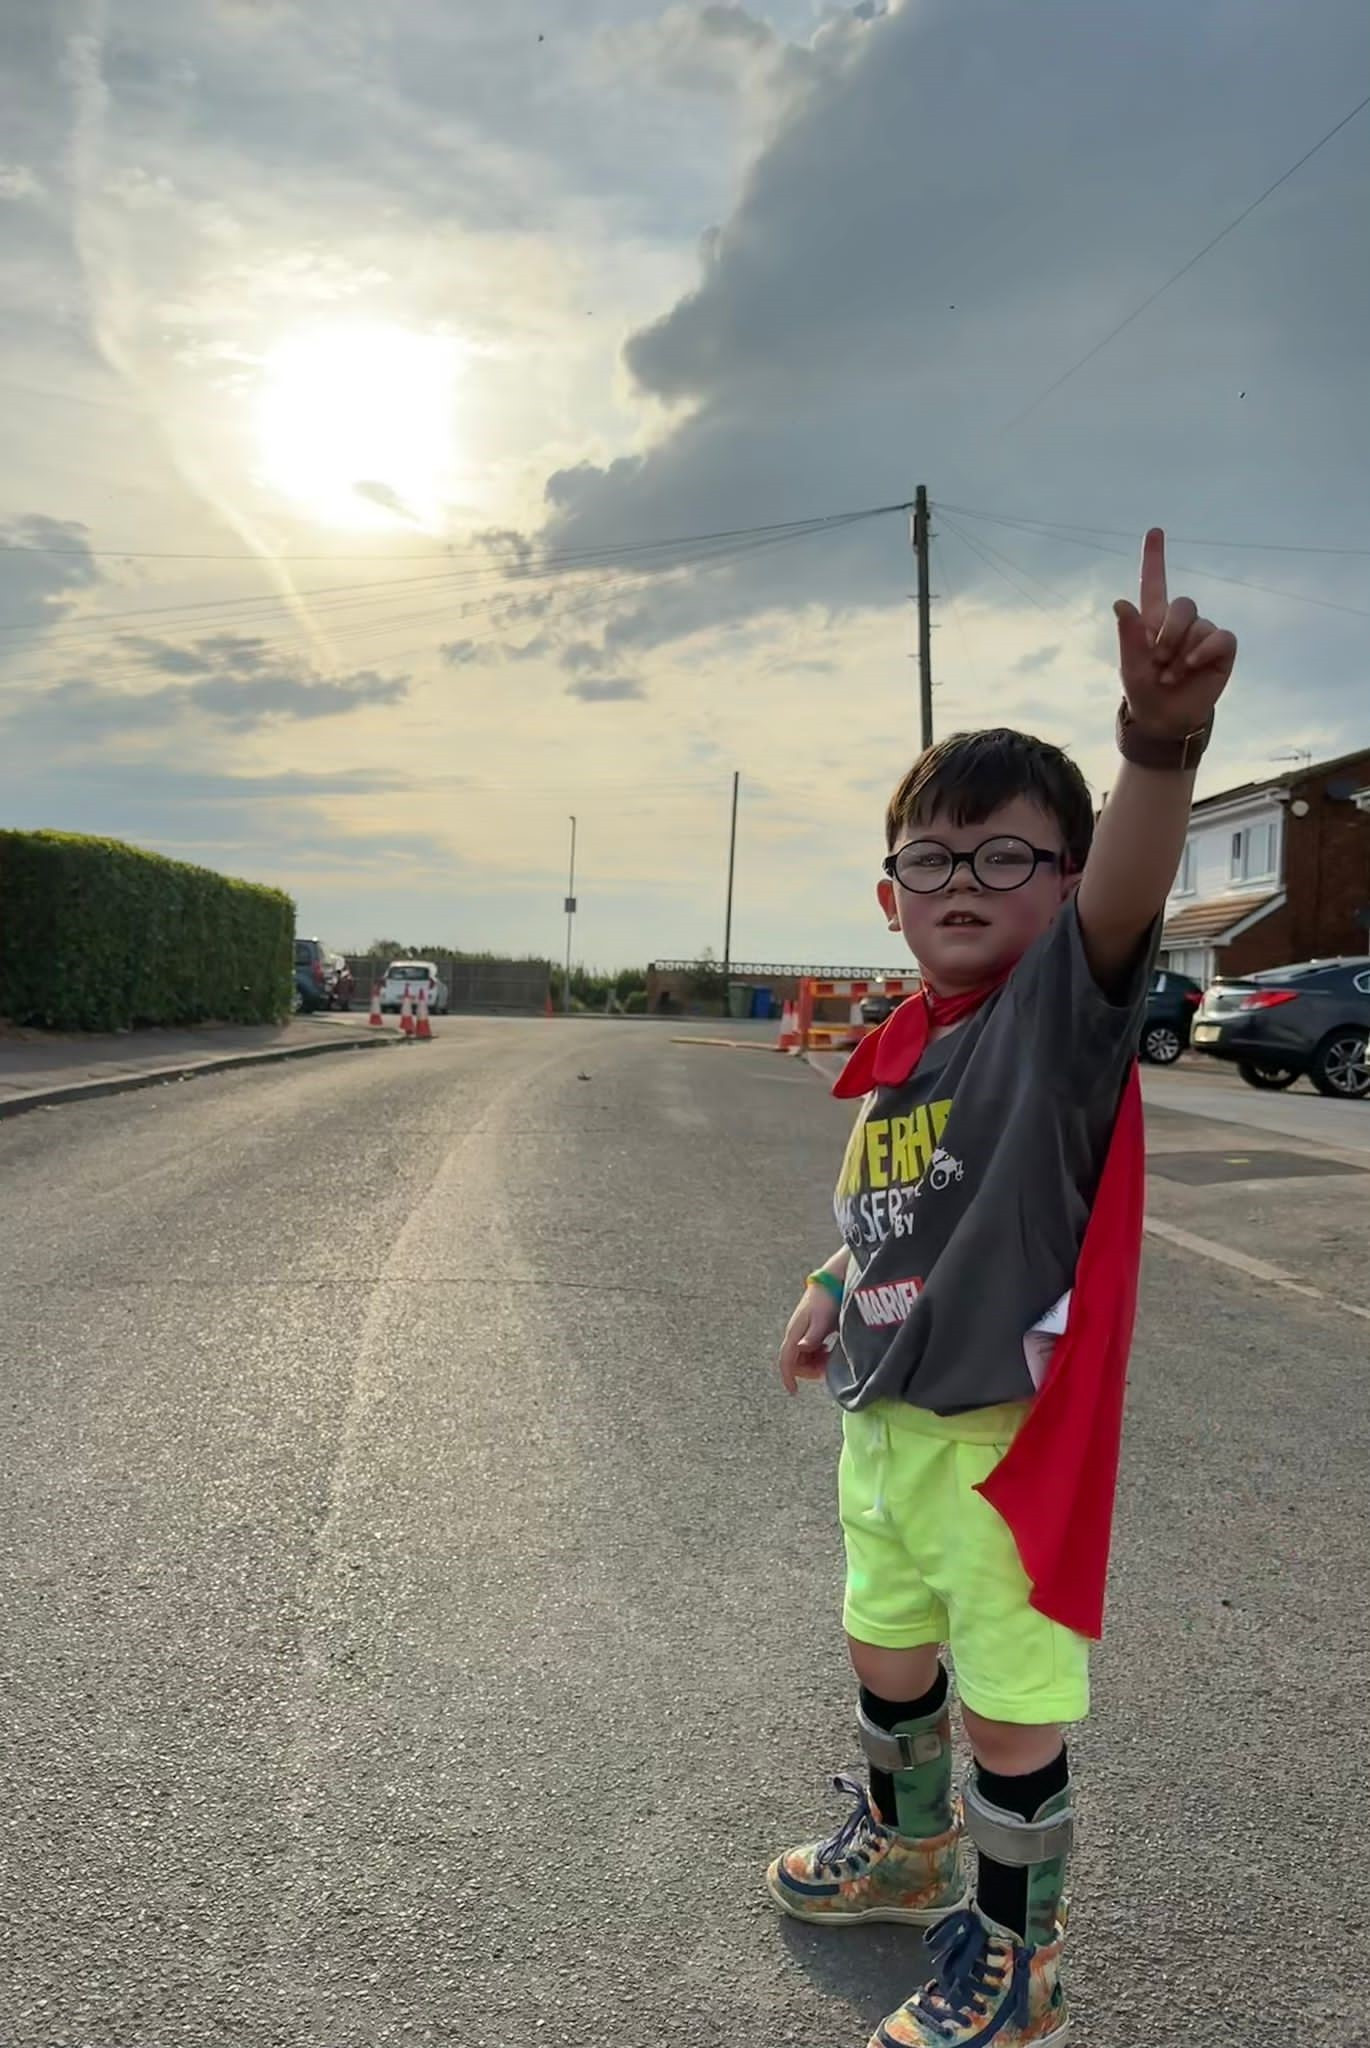 Little Vincent Simester at the start of his superhero challenge. Image shows a child pictured outside wearing a cape and with splints on his legs. He is doing a superman pose.